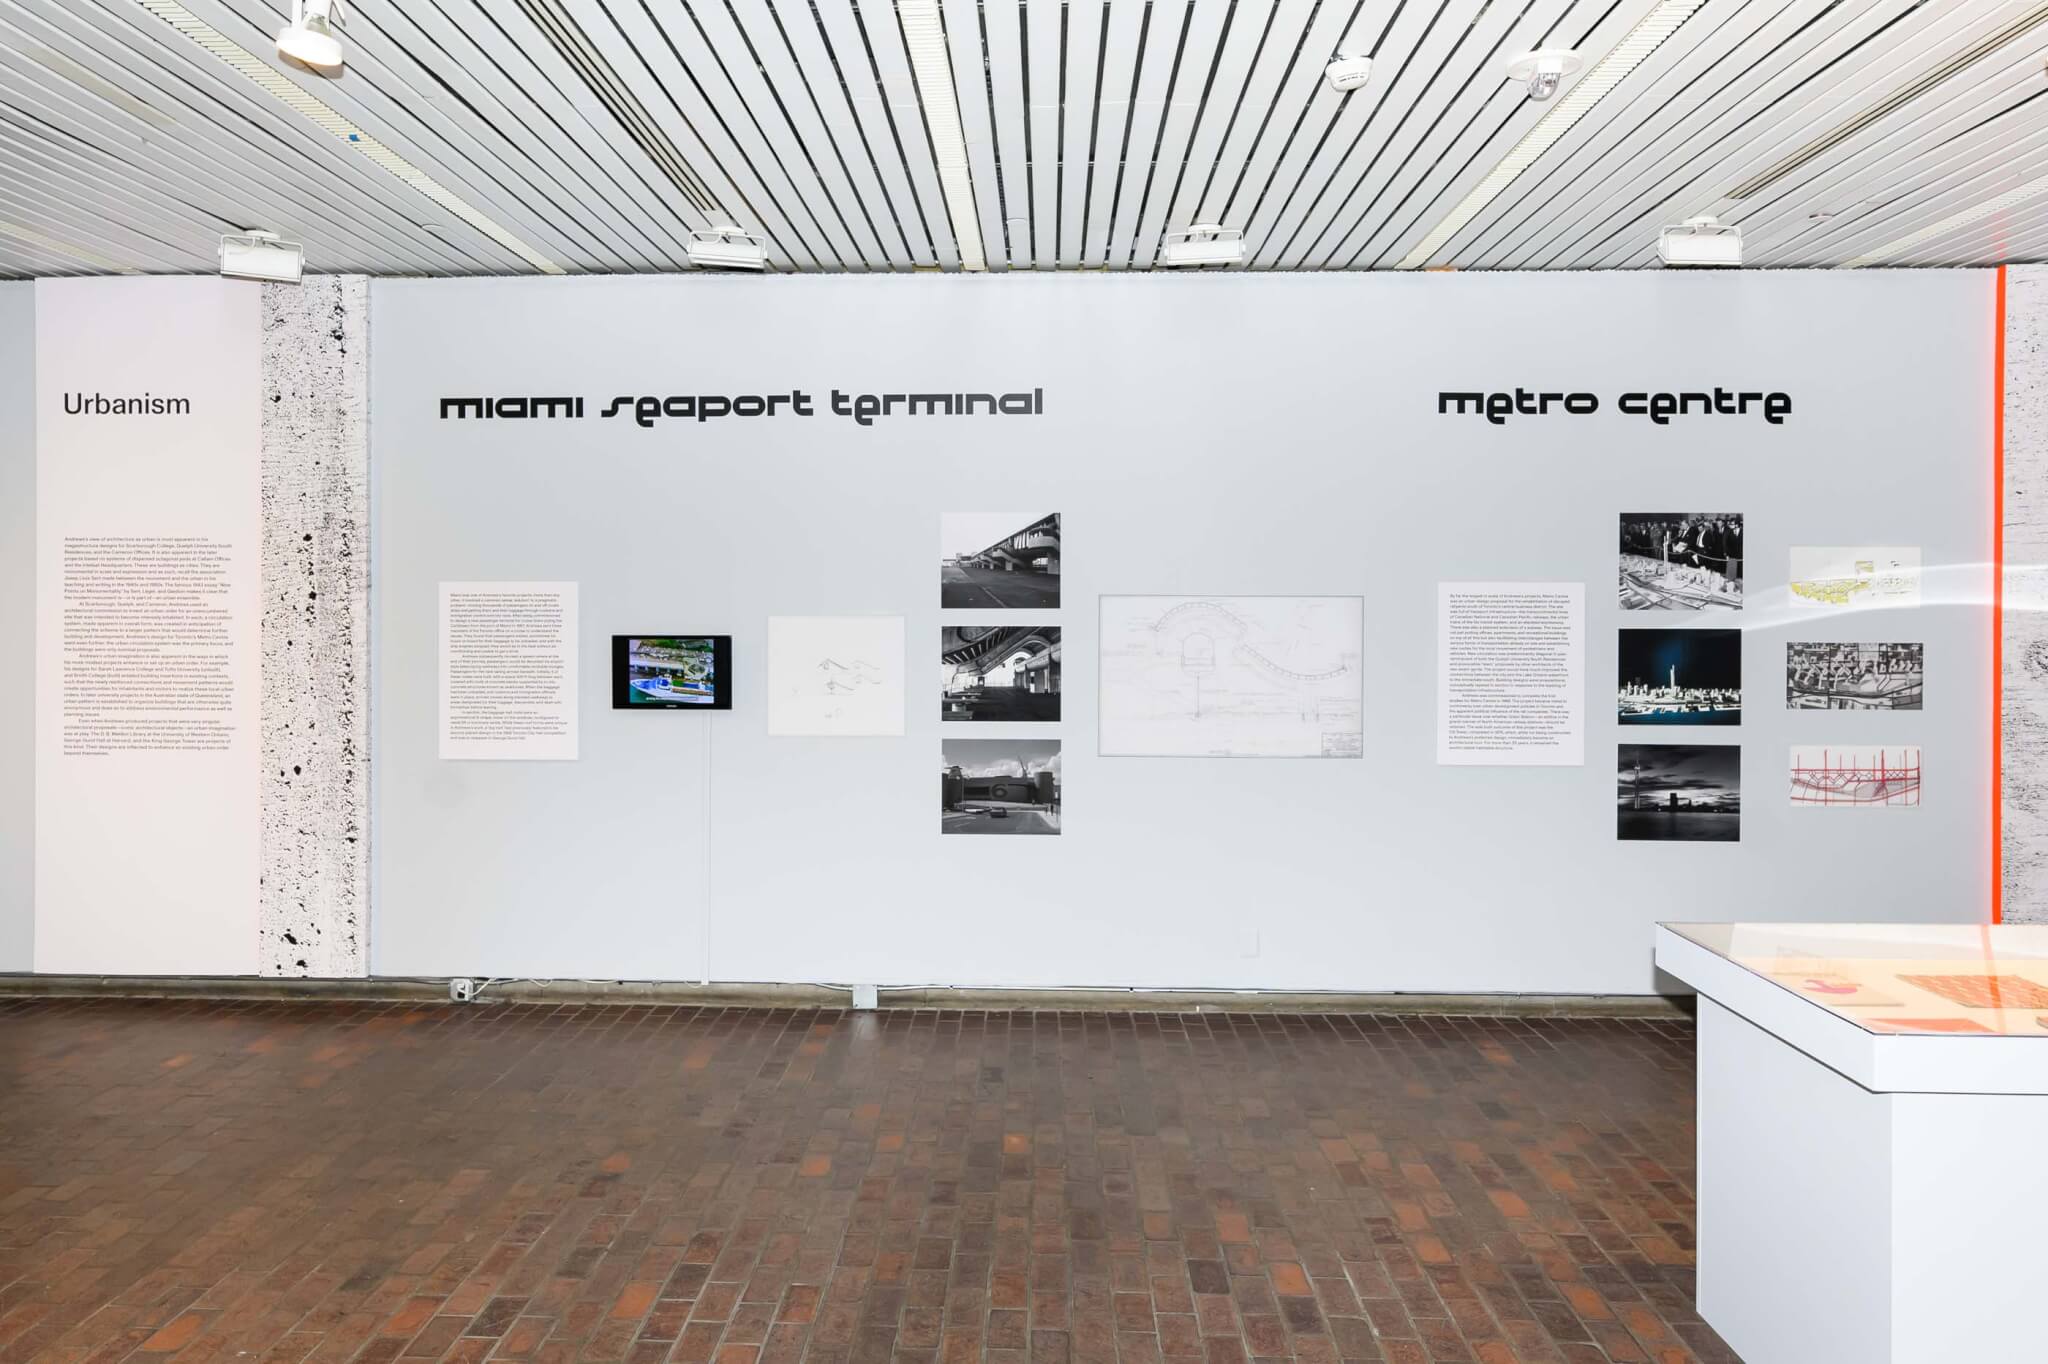 exhibition view with wall text and archival images